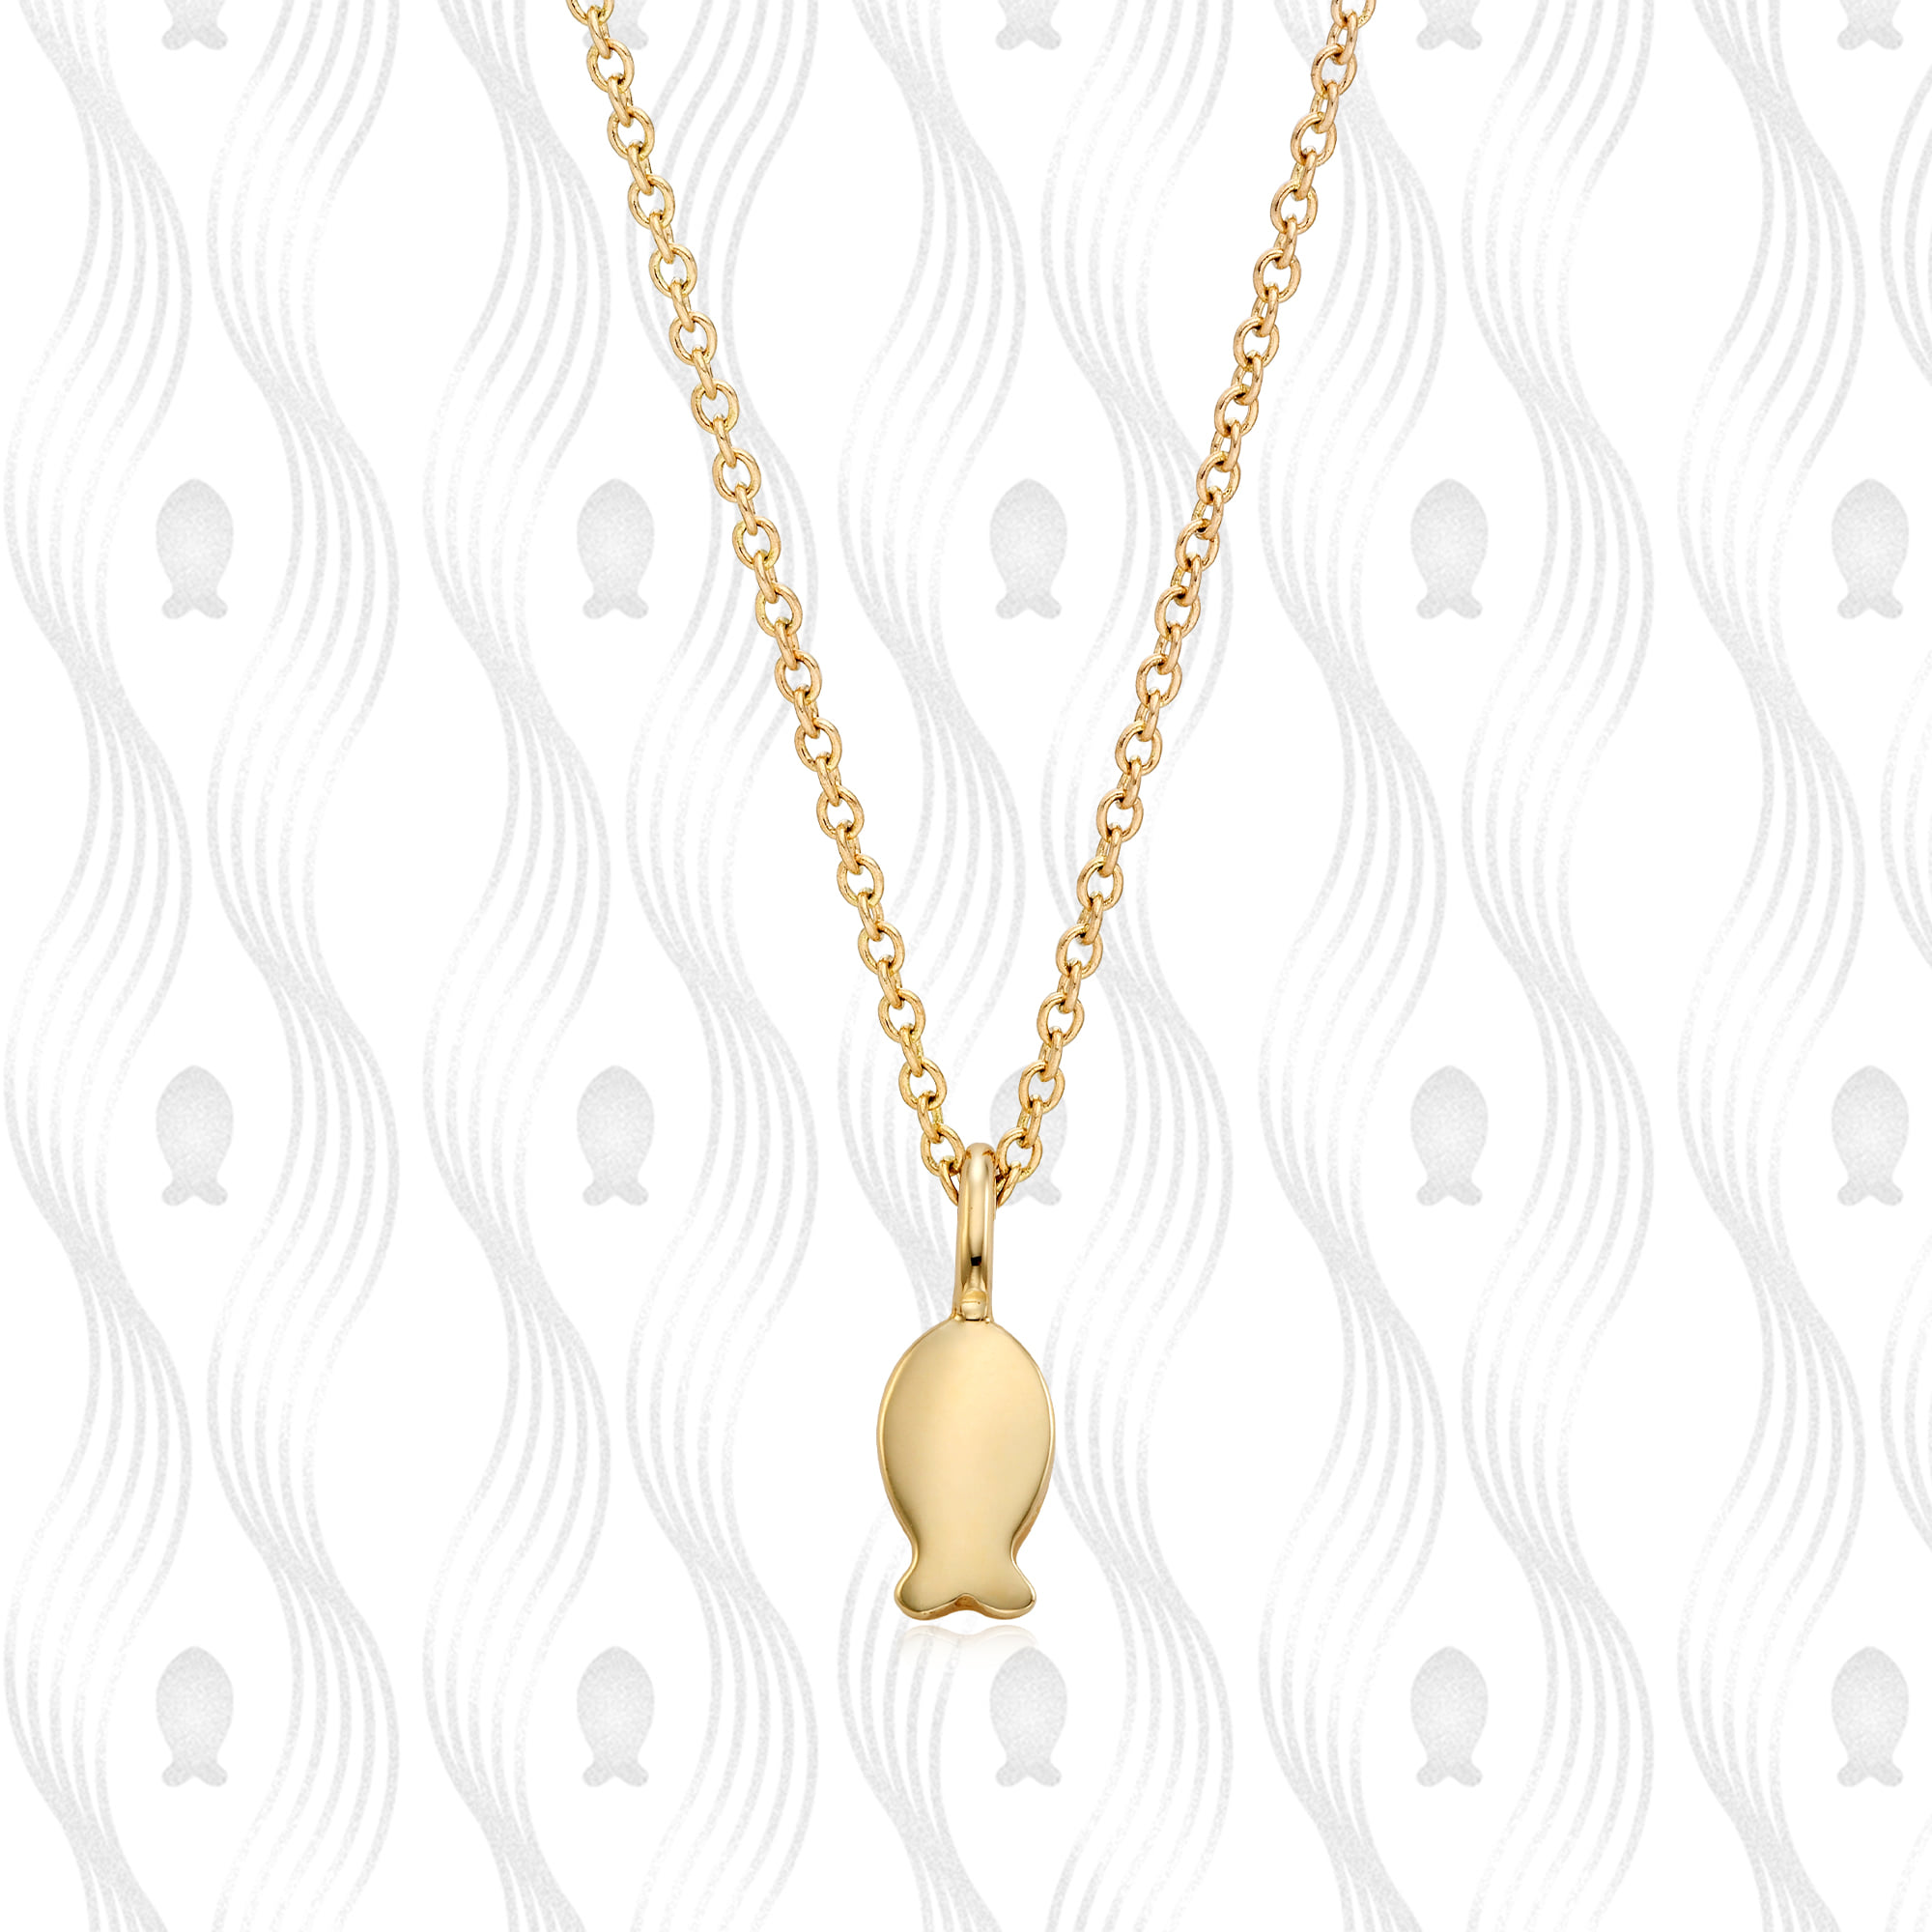 14K/18K Gold Caille Wish Necklace - Carp only towards the goal